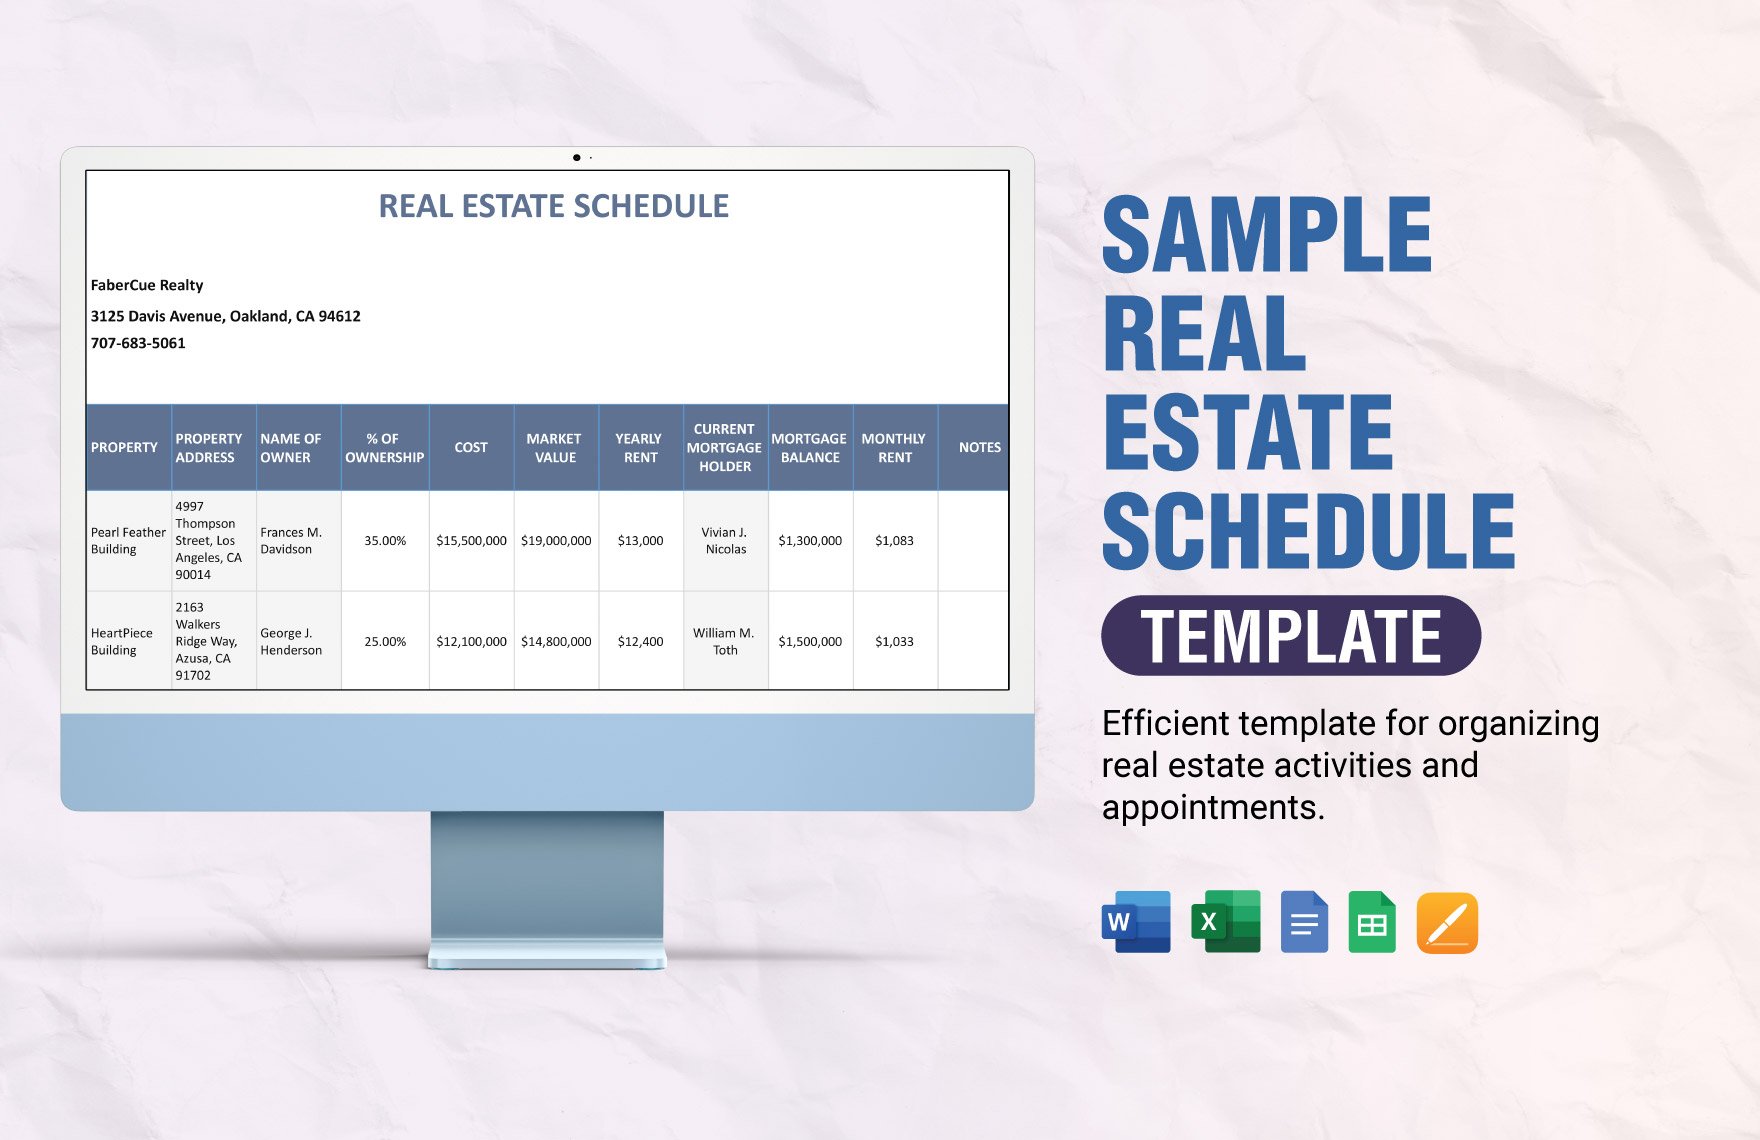 Sample Real Estate Schedule Template in Word, Google Docs, Excel, Google Sheets, Apple Pages